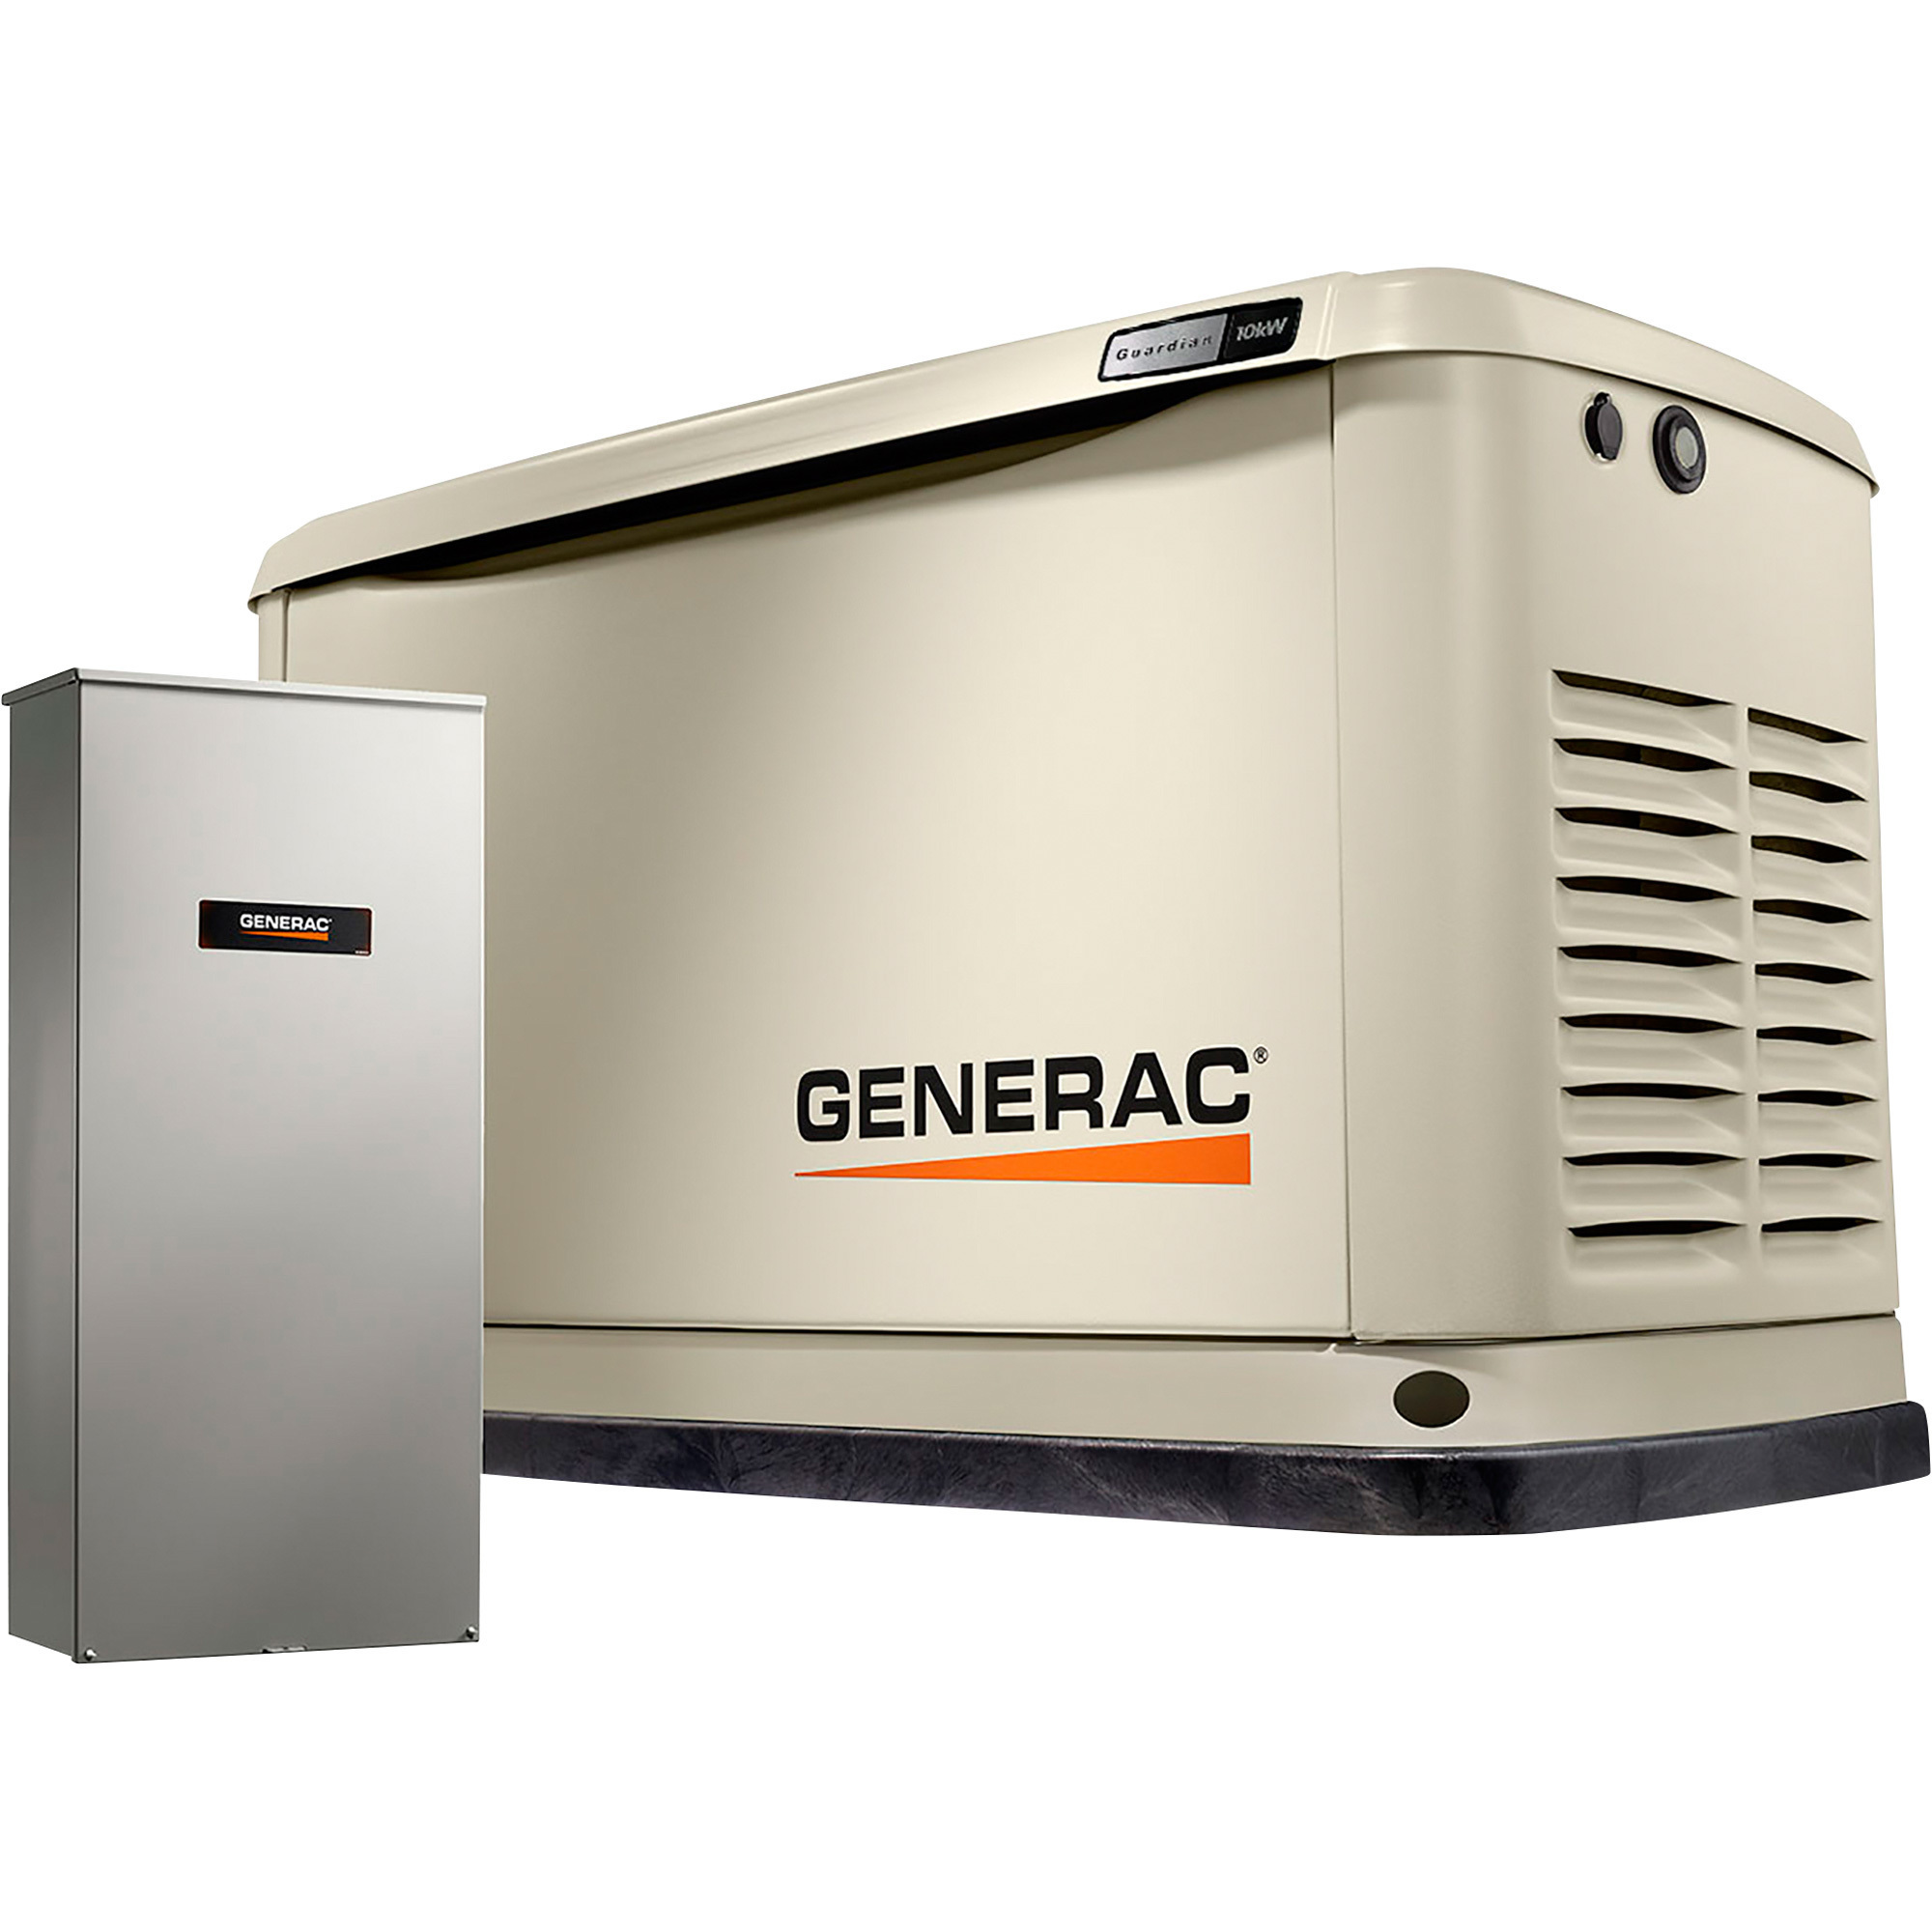 Generac 10 kW (LP)/9 kW (NG), Guardian Series Air-Cooled Home Standby Generator 100 Amp Transfer Switch - Model #7172